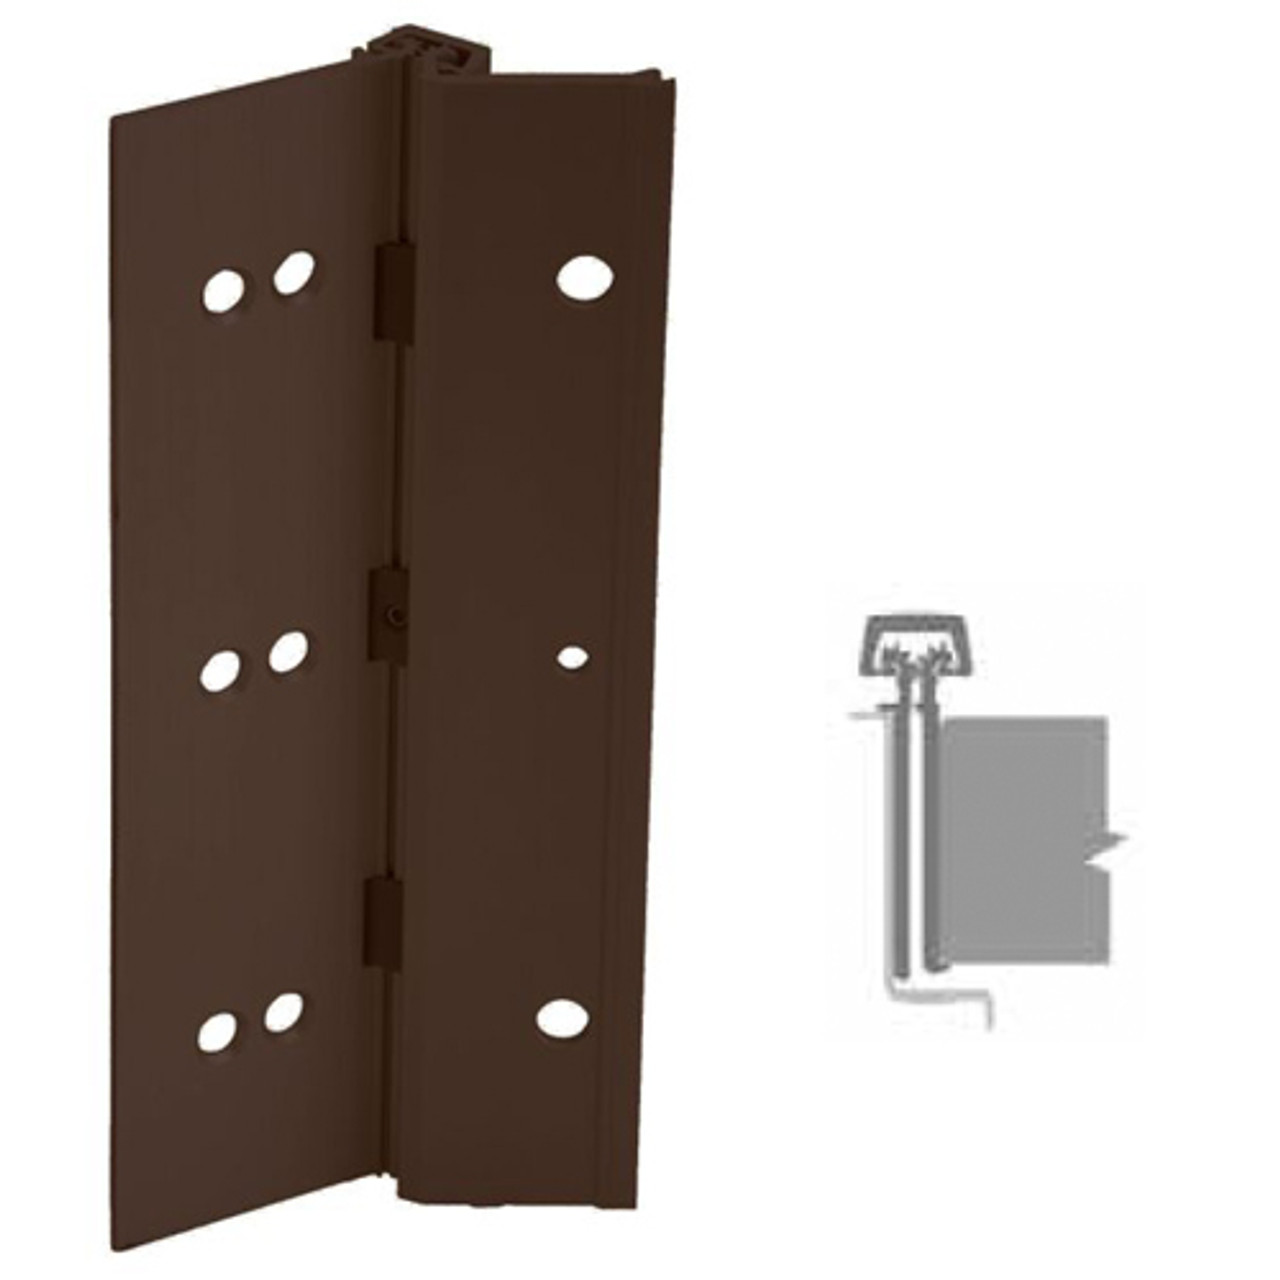 224HD-313AN-83-WD IVES Full Mortise Continuous Geared Hinges with Wood Screws in Dark Bronze Anodized